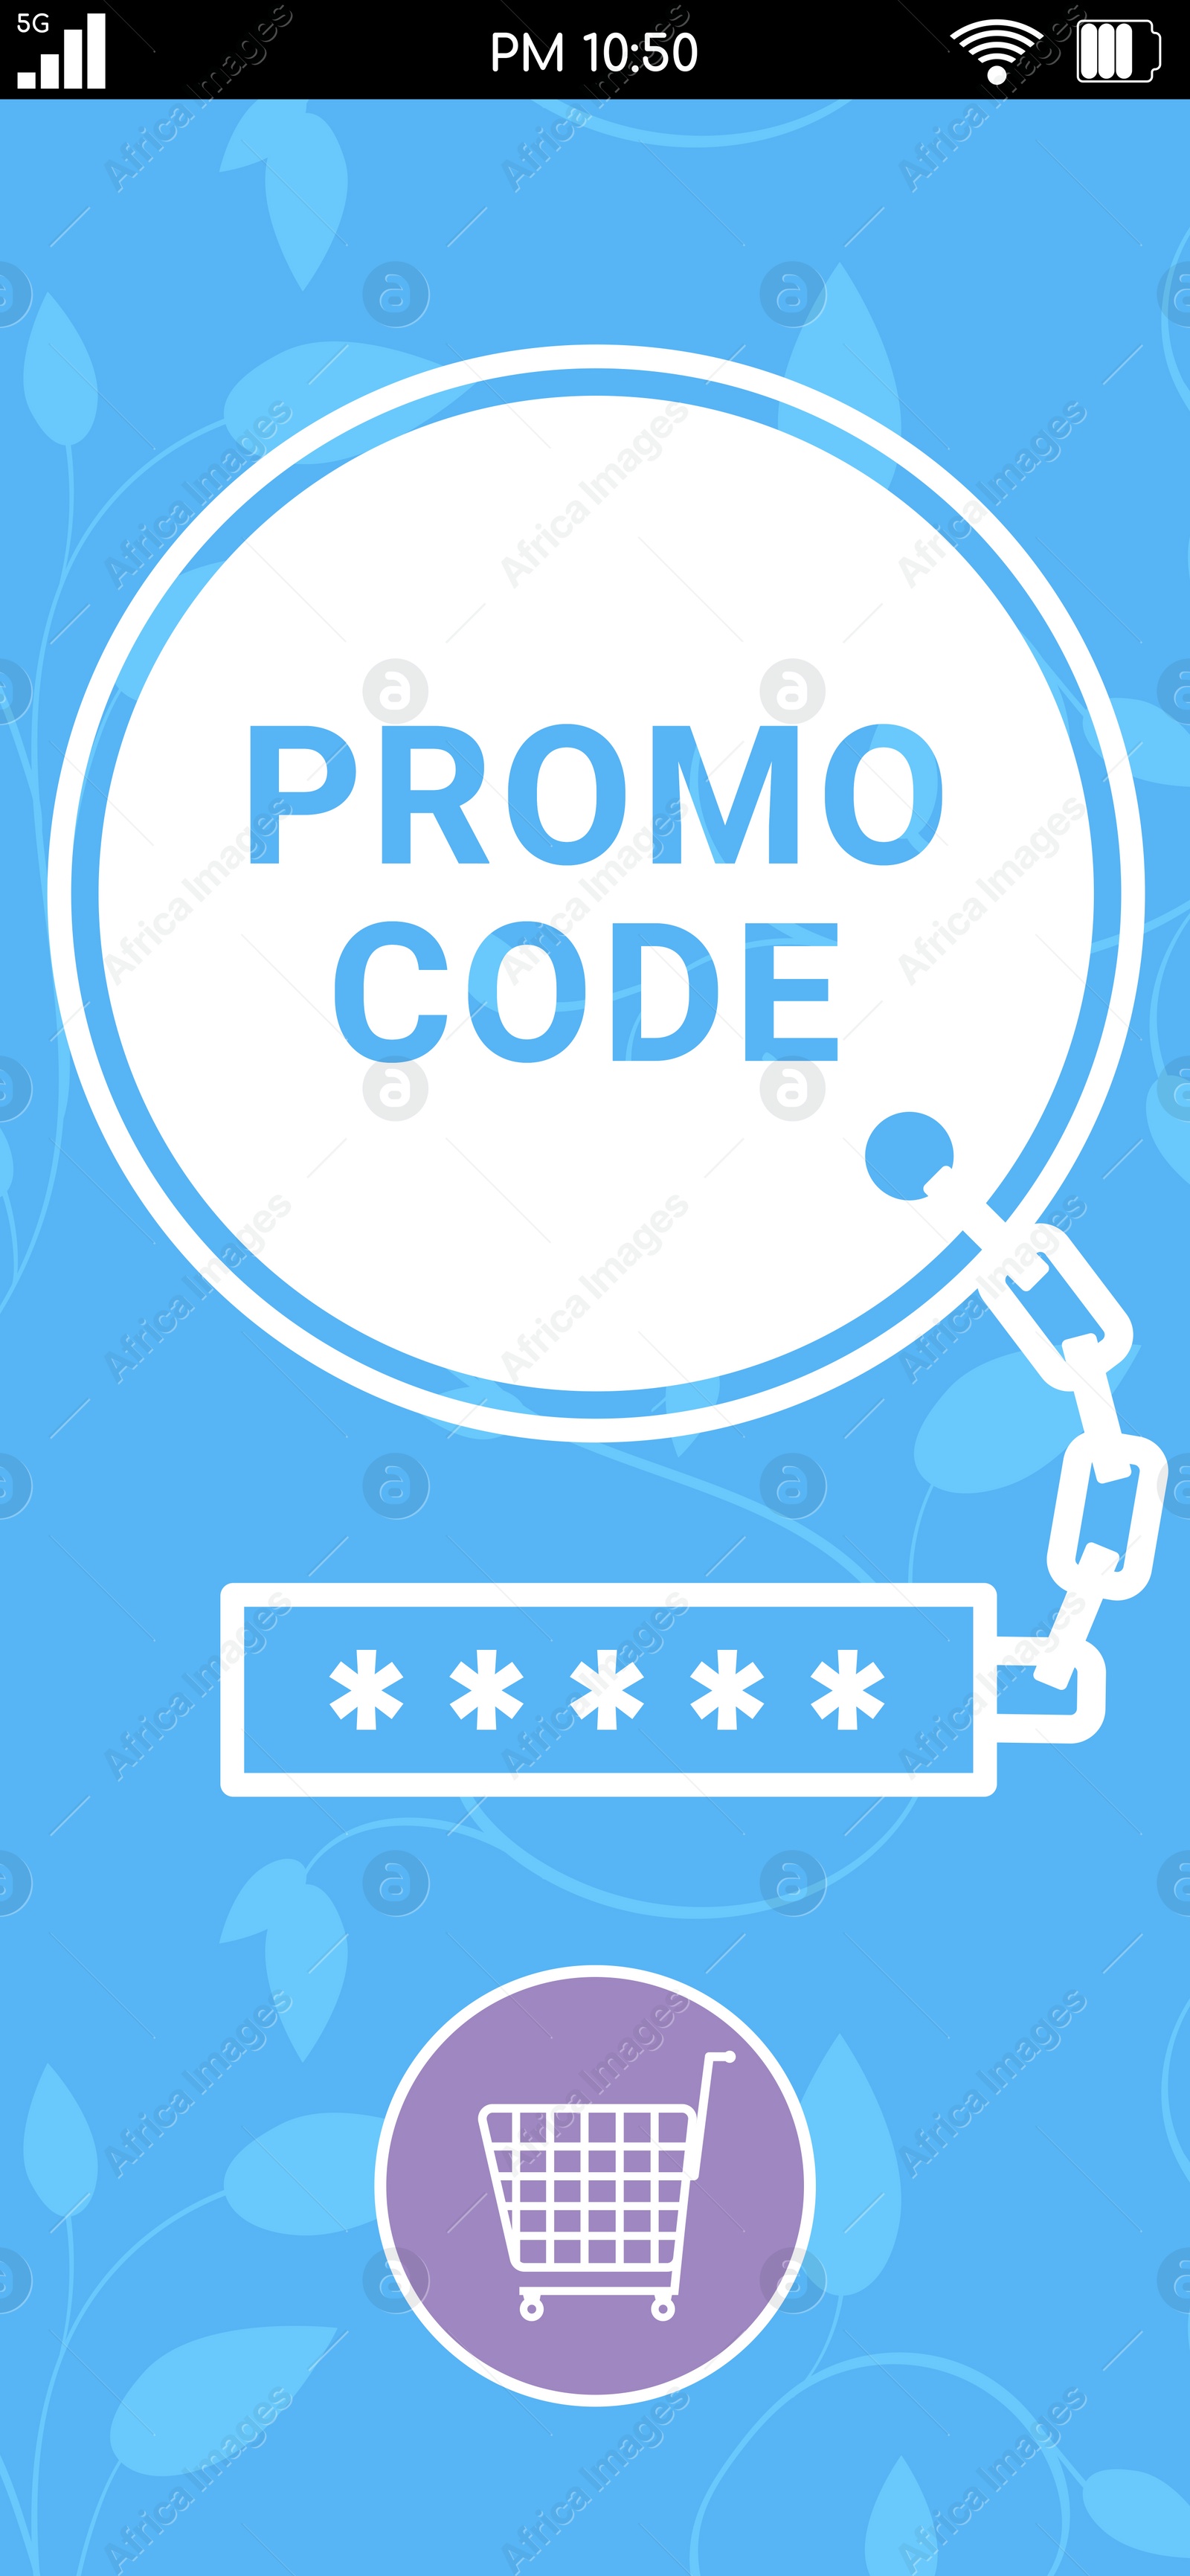 Illustration of Online shopping app with activated promo code on smartphone screen